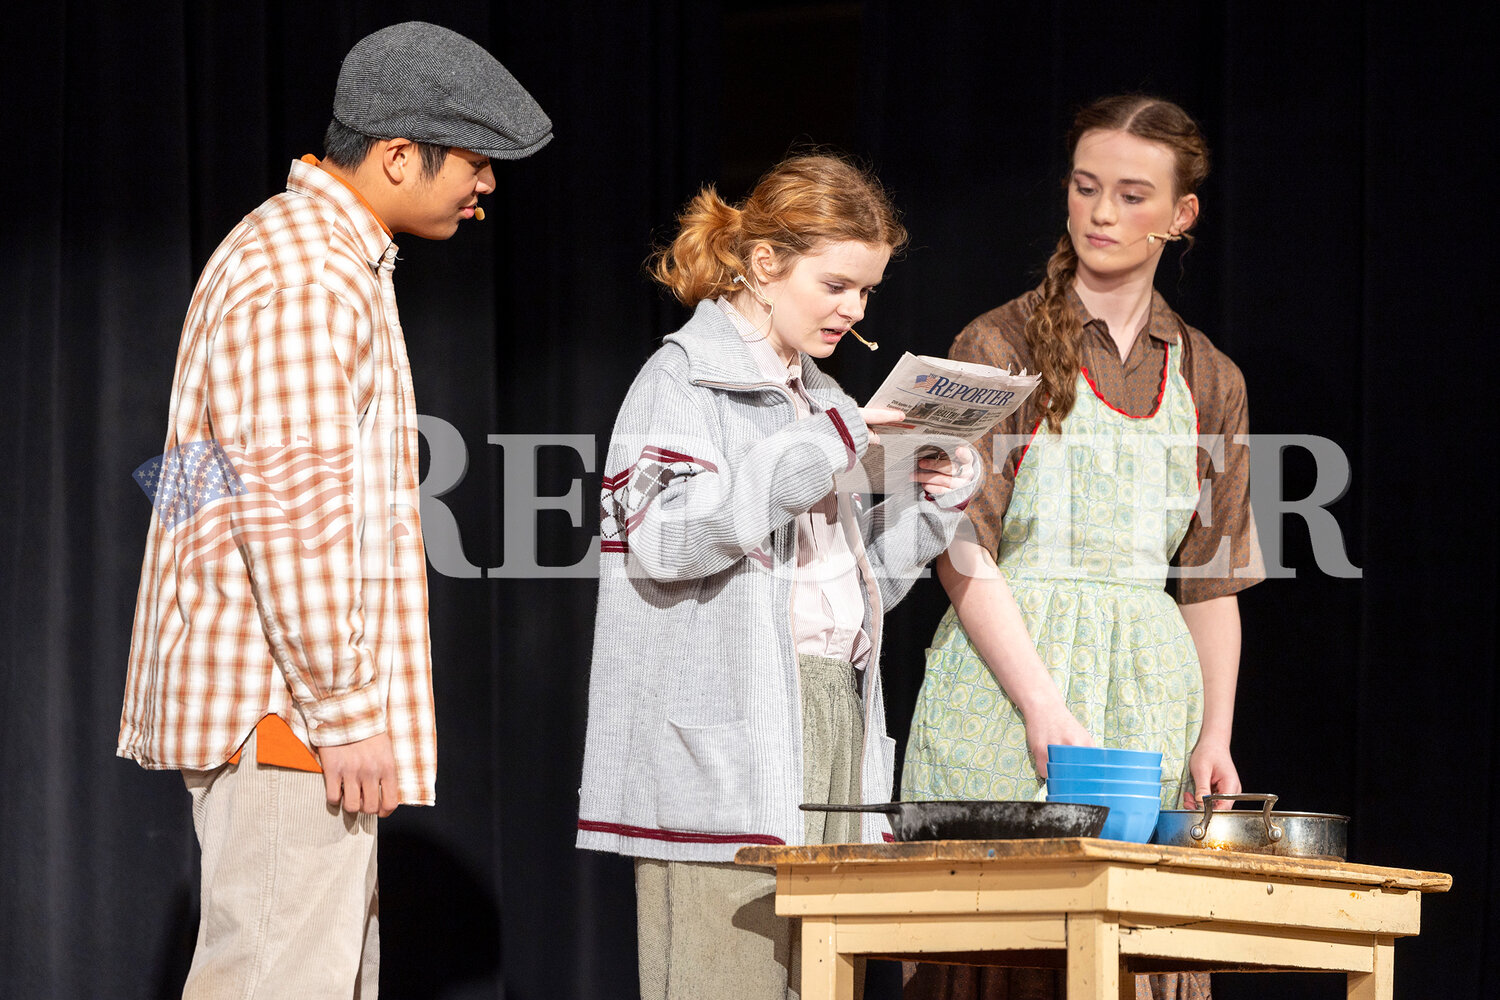 From left, Charlie Bucket played by David Gatchalian, and Mr. and Mrs. Bucket played by Kye Weil and Raegan Foster read the newspaper Saturday, March 23.